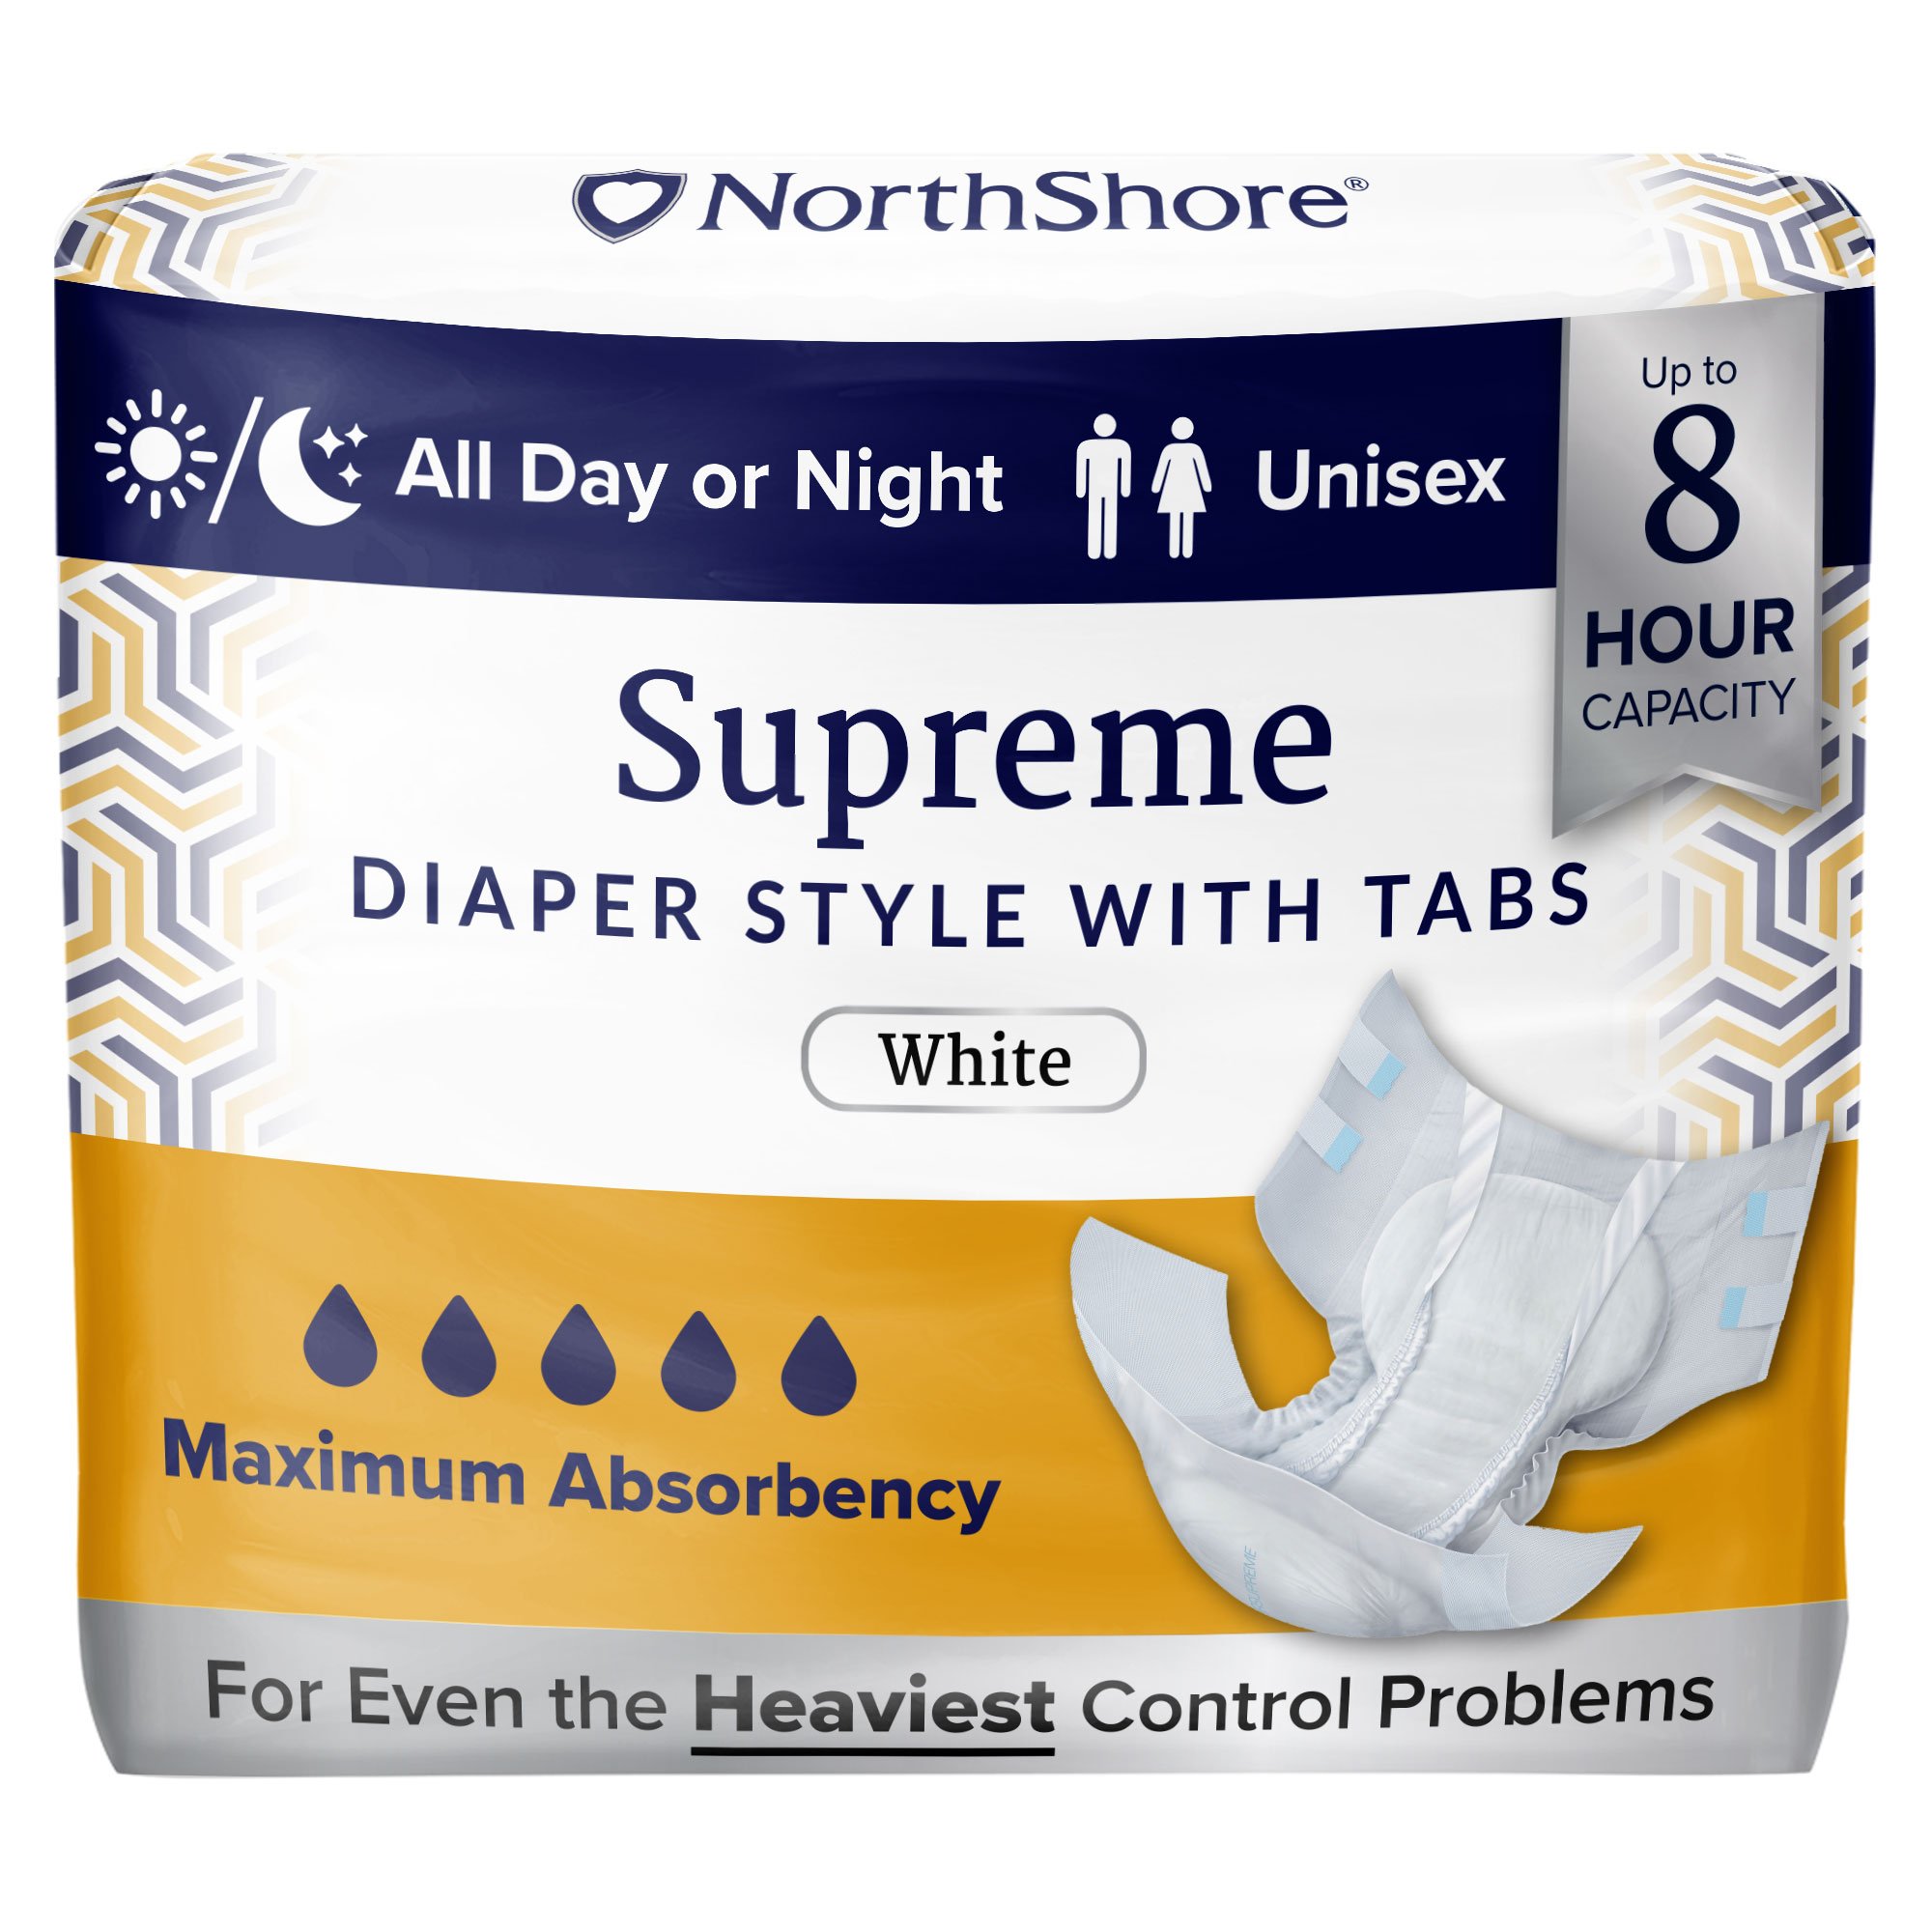 NorthShore Supreme adult diapers in blue, green, purple and white